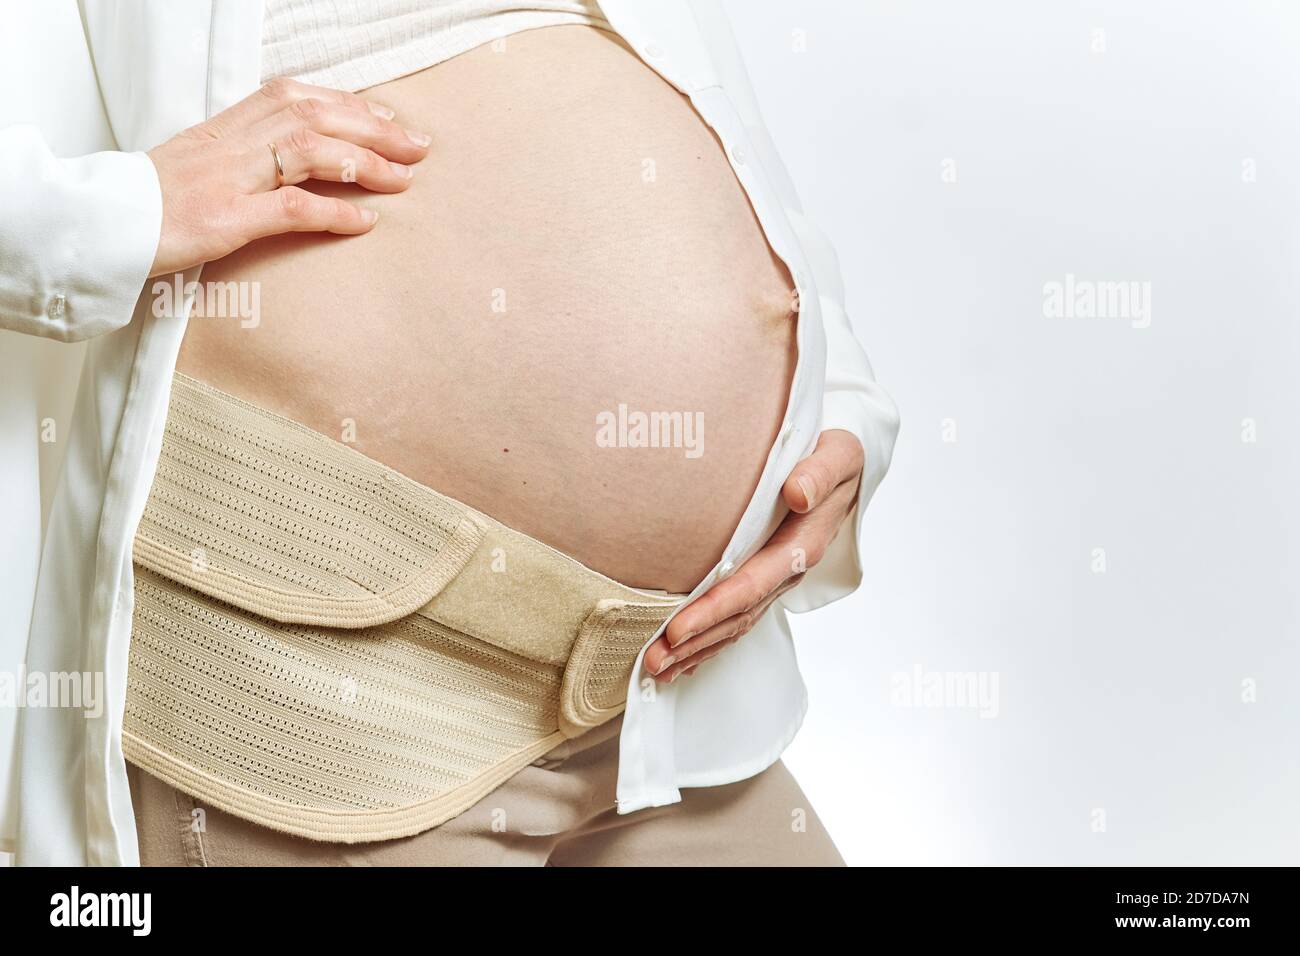 Pregnant woman's belly faceless and hands close-up isolated. Maternity Belt Pregnancy Abdomen Support Abdominal Binde. side view and copy space. Stock Photo